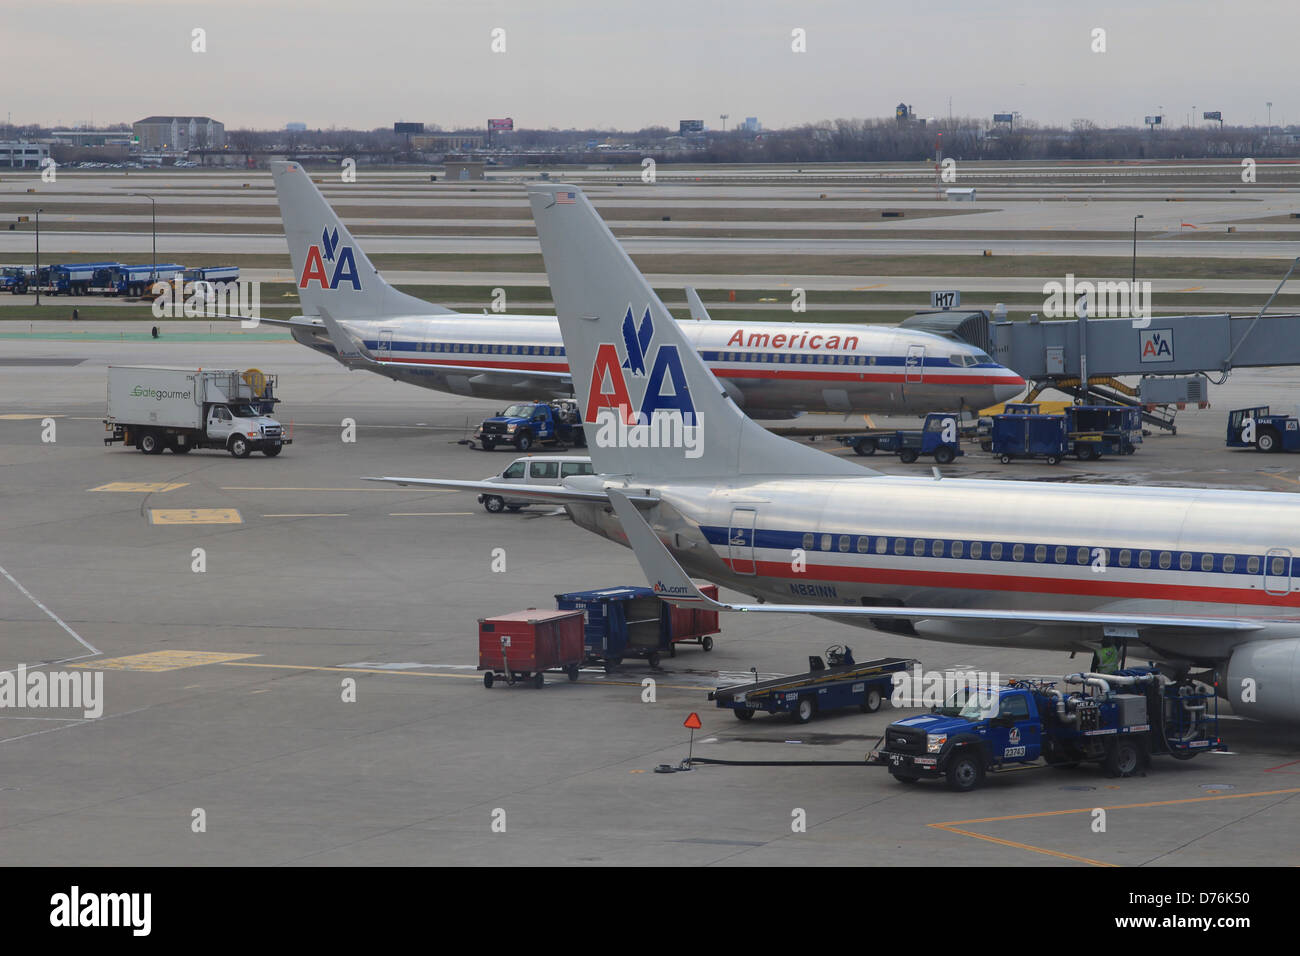 American Airlines plane arriving at Chicago O'Hare airport Stock Photo